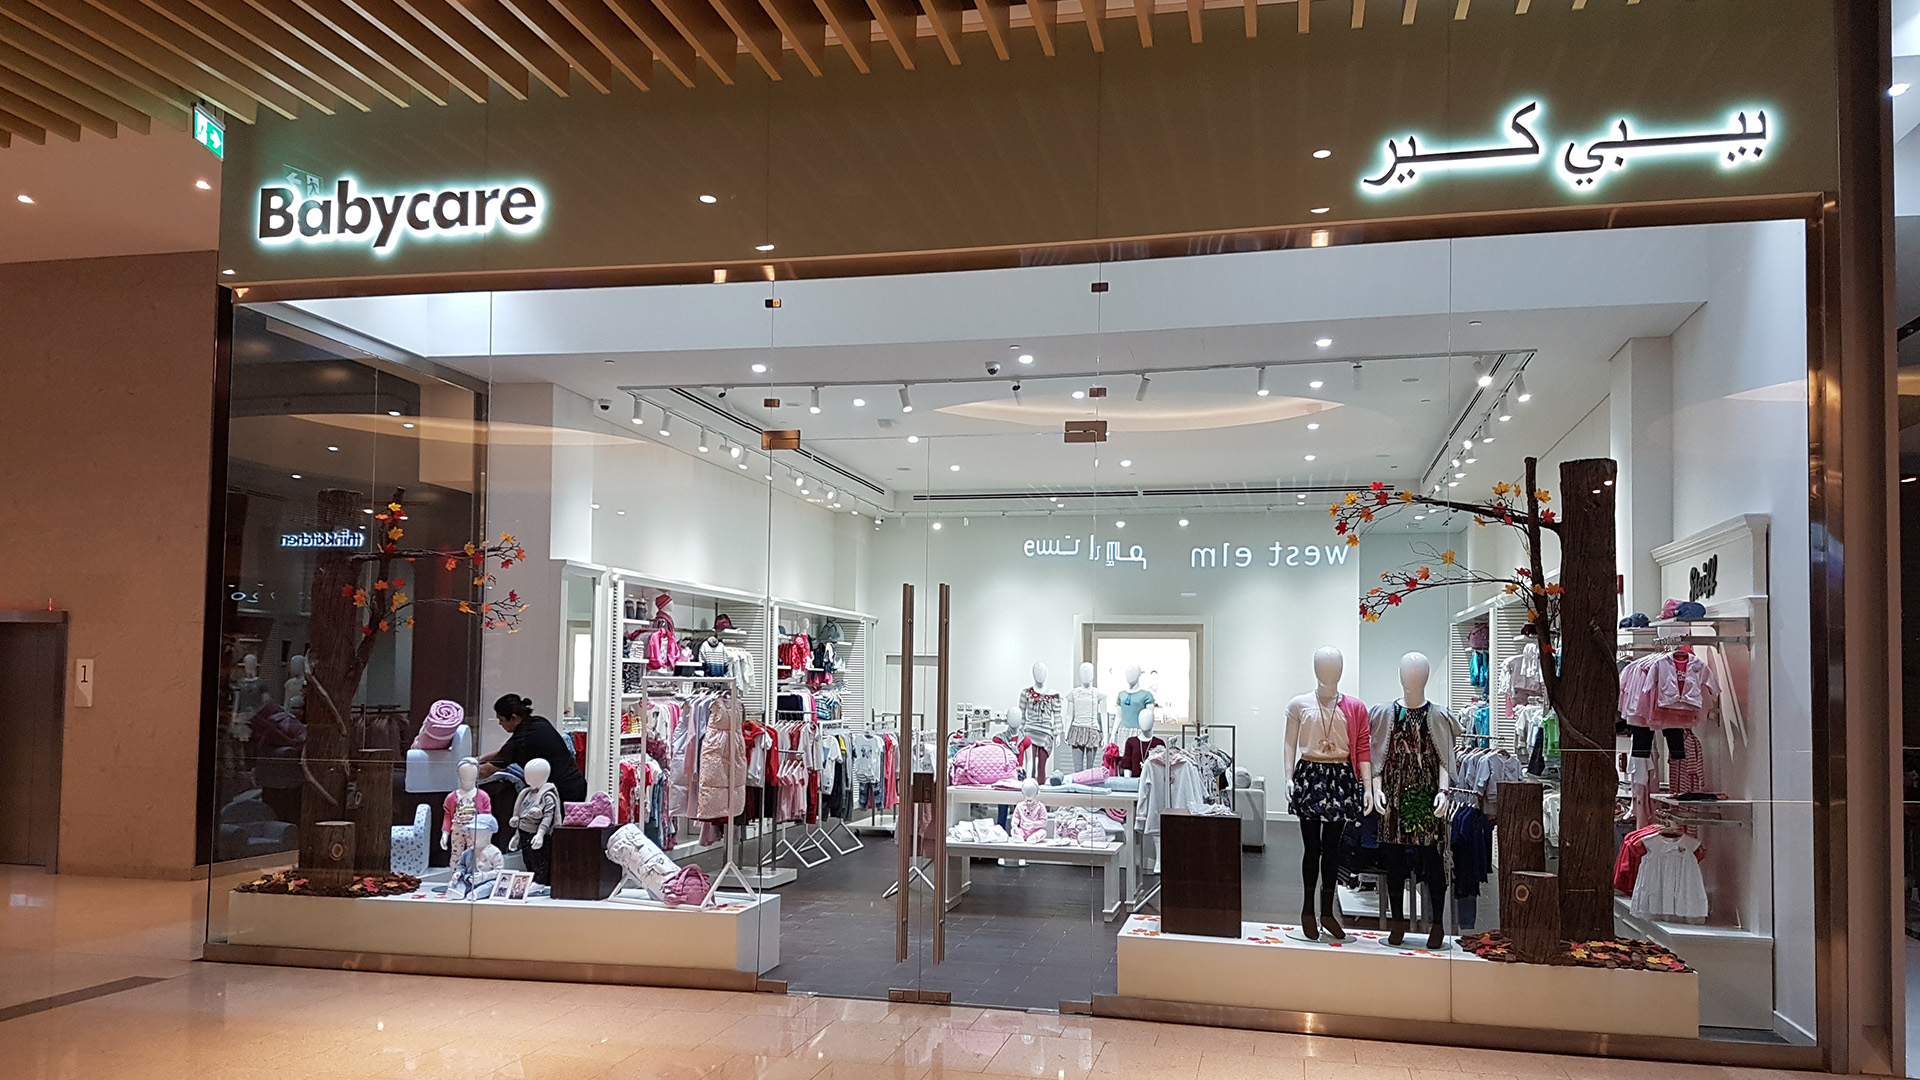 Babycare Window produced and installed by ME Visual, Qatar